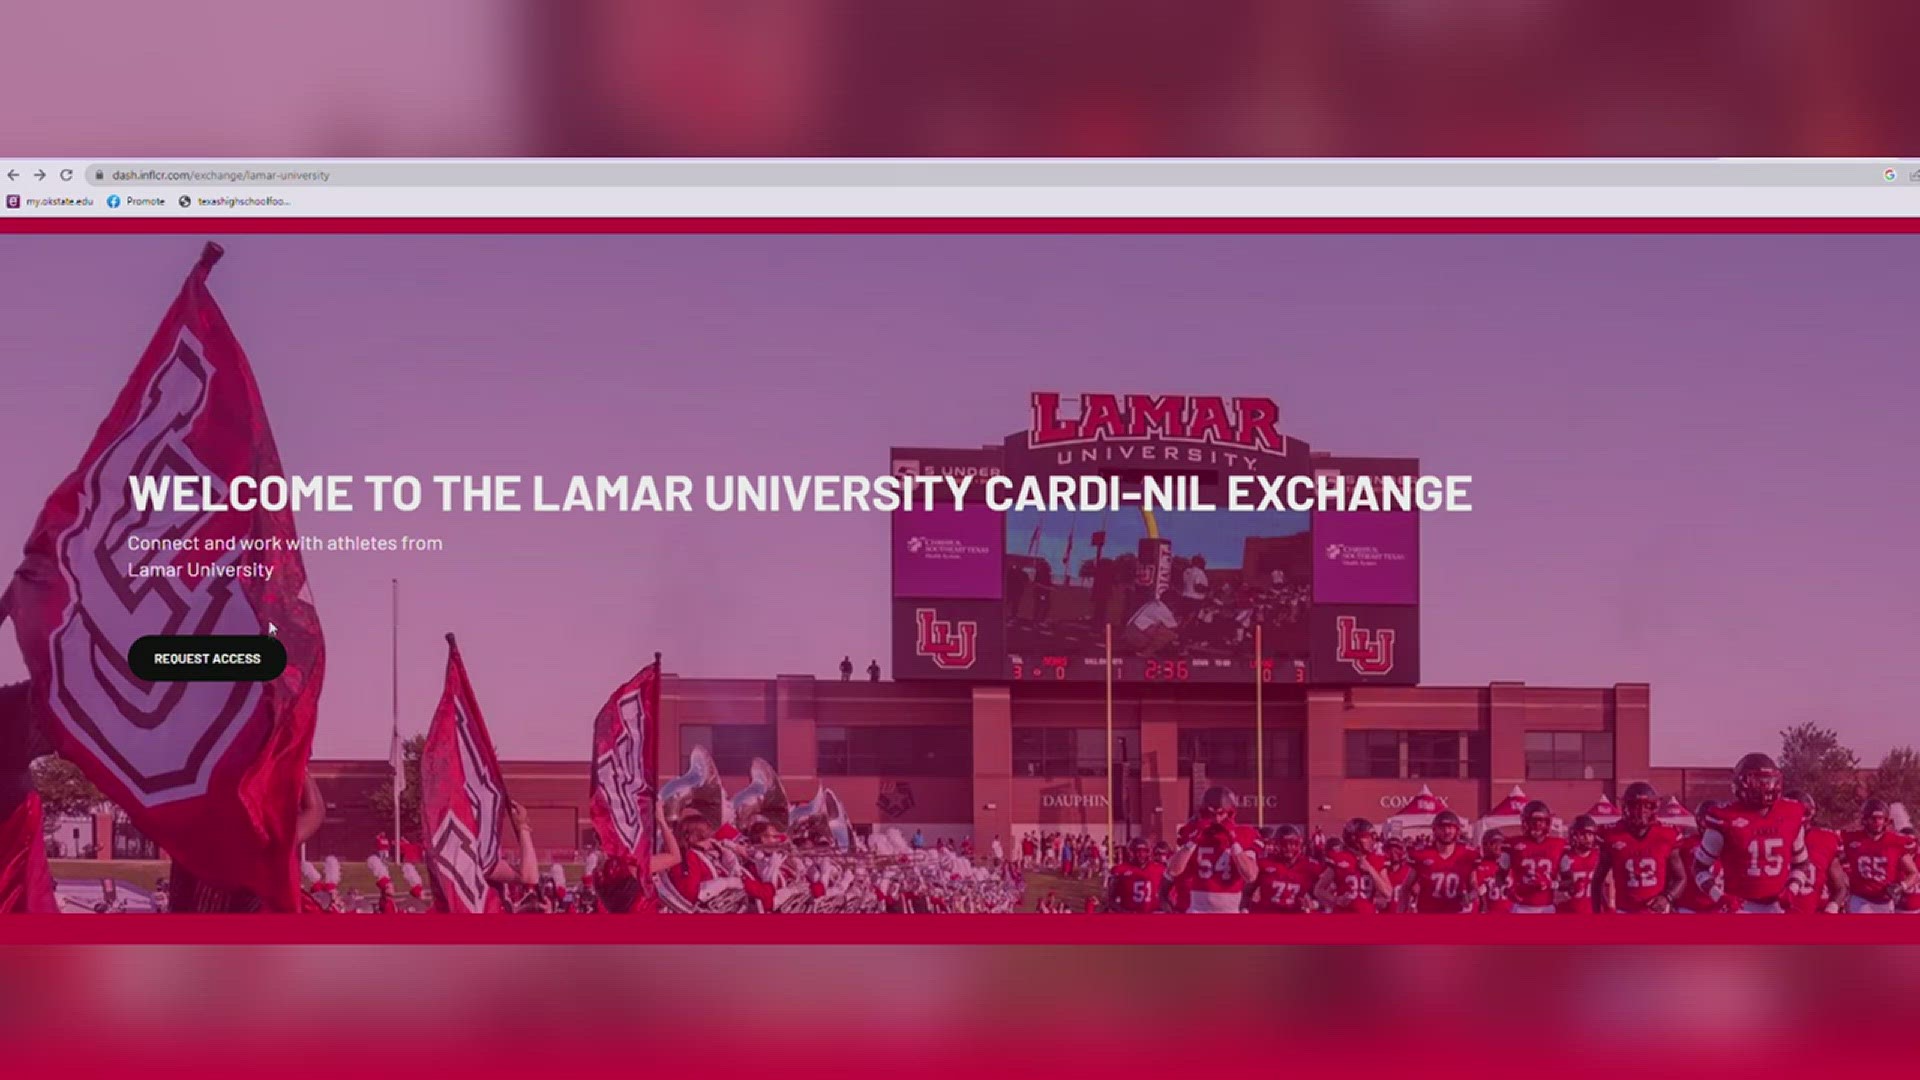 Lamar launched the CardiNIL Exchange with help from INFLCR so student-athletes can pursue Name, Image, & Likeness (NIL) business opportunities.